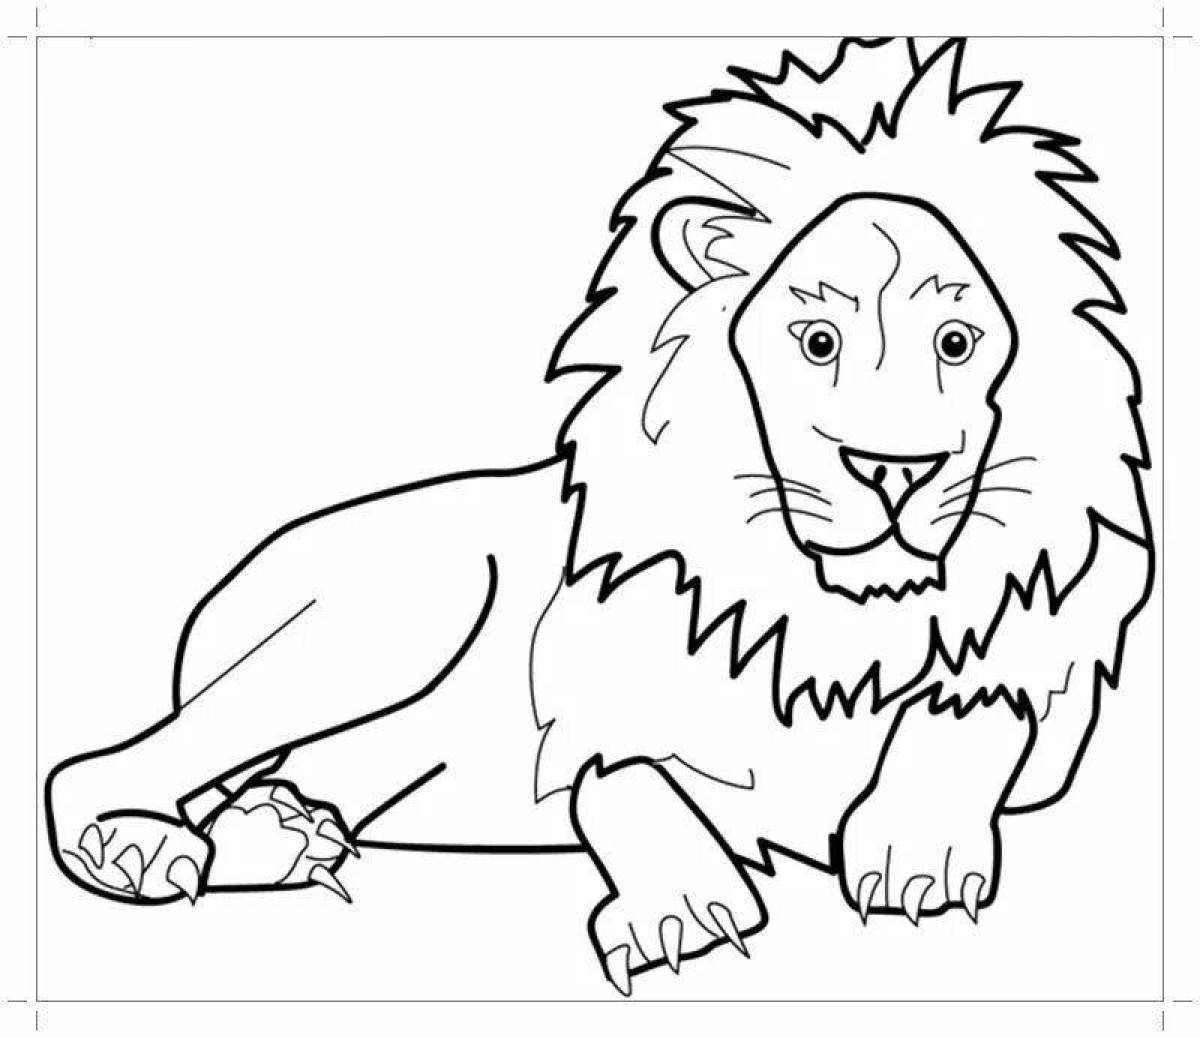 Royal lion coloring book for kids